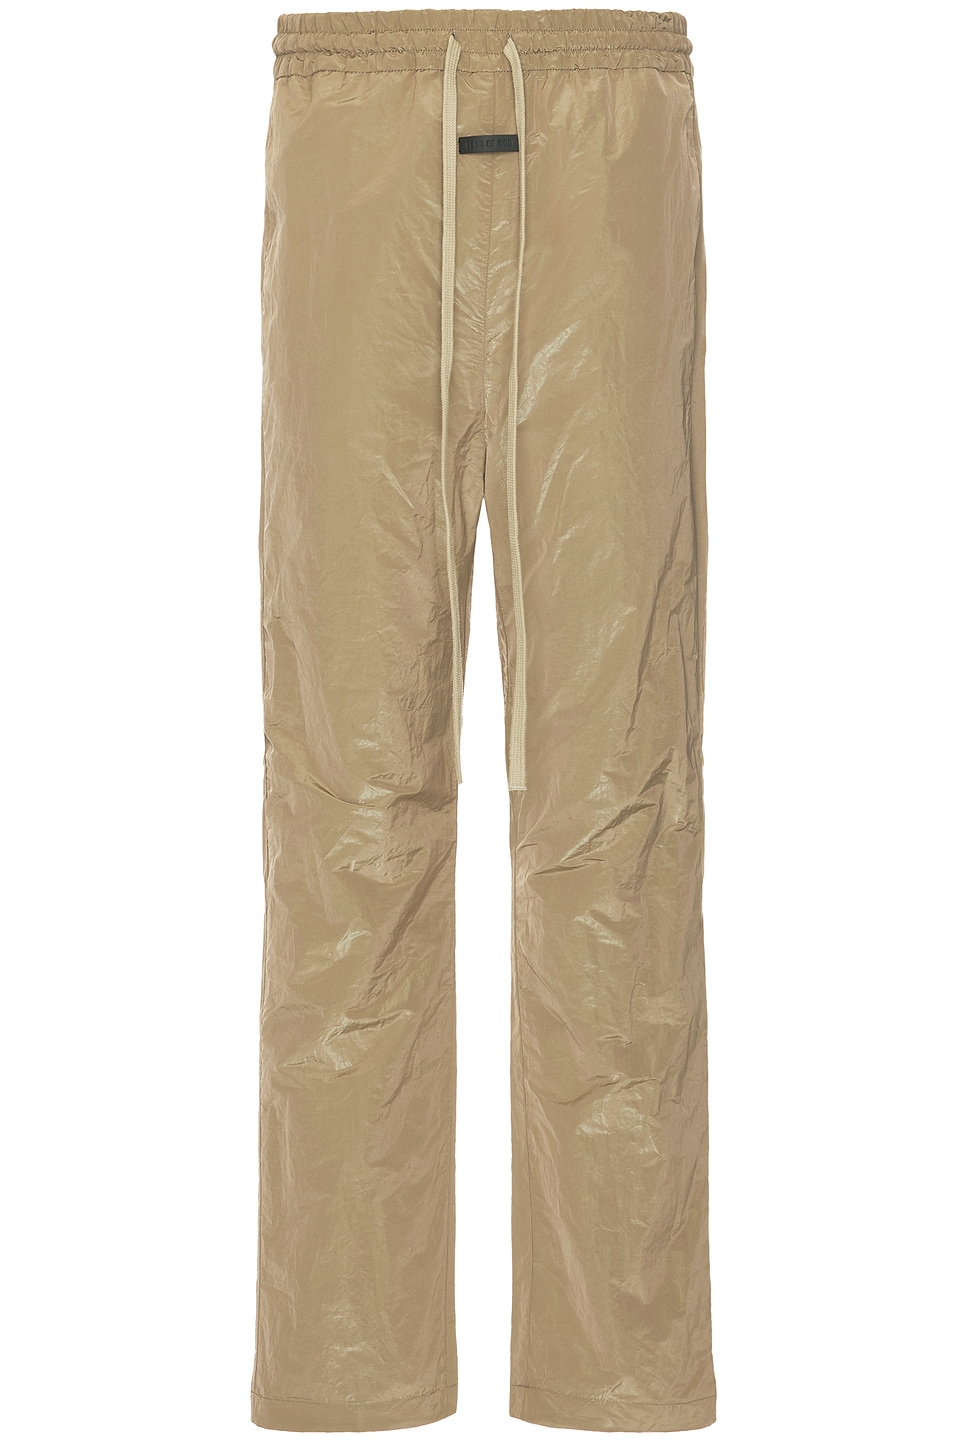 Image 1 of Fear of God Wrinkled Polyester Forum Pant in Dune